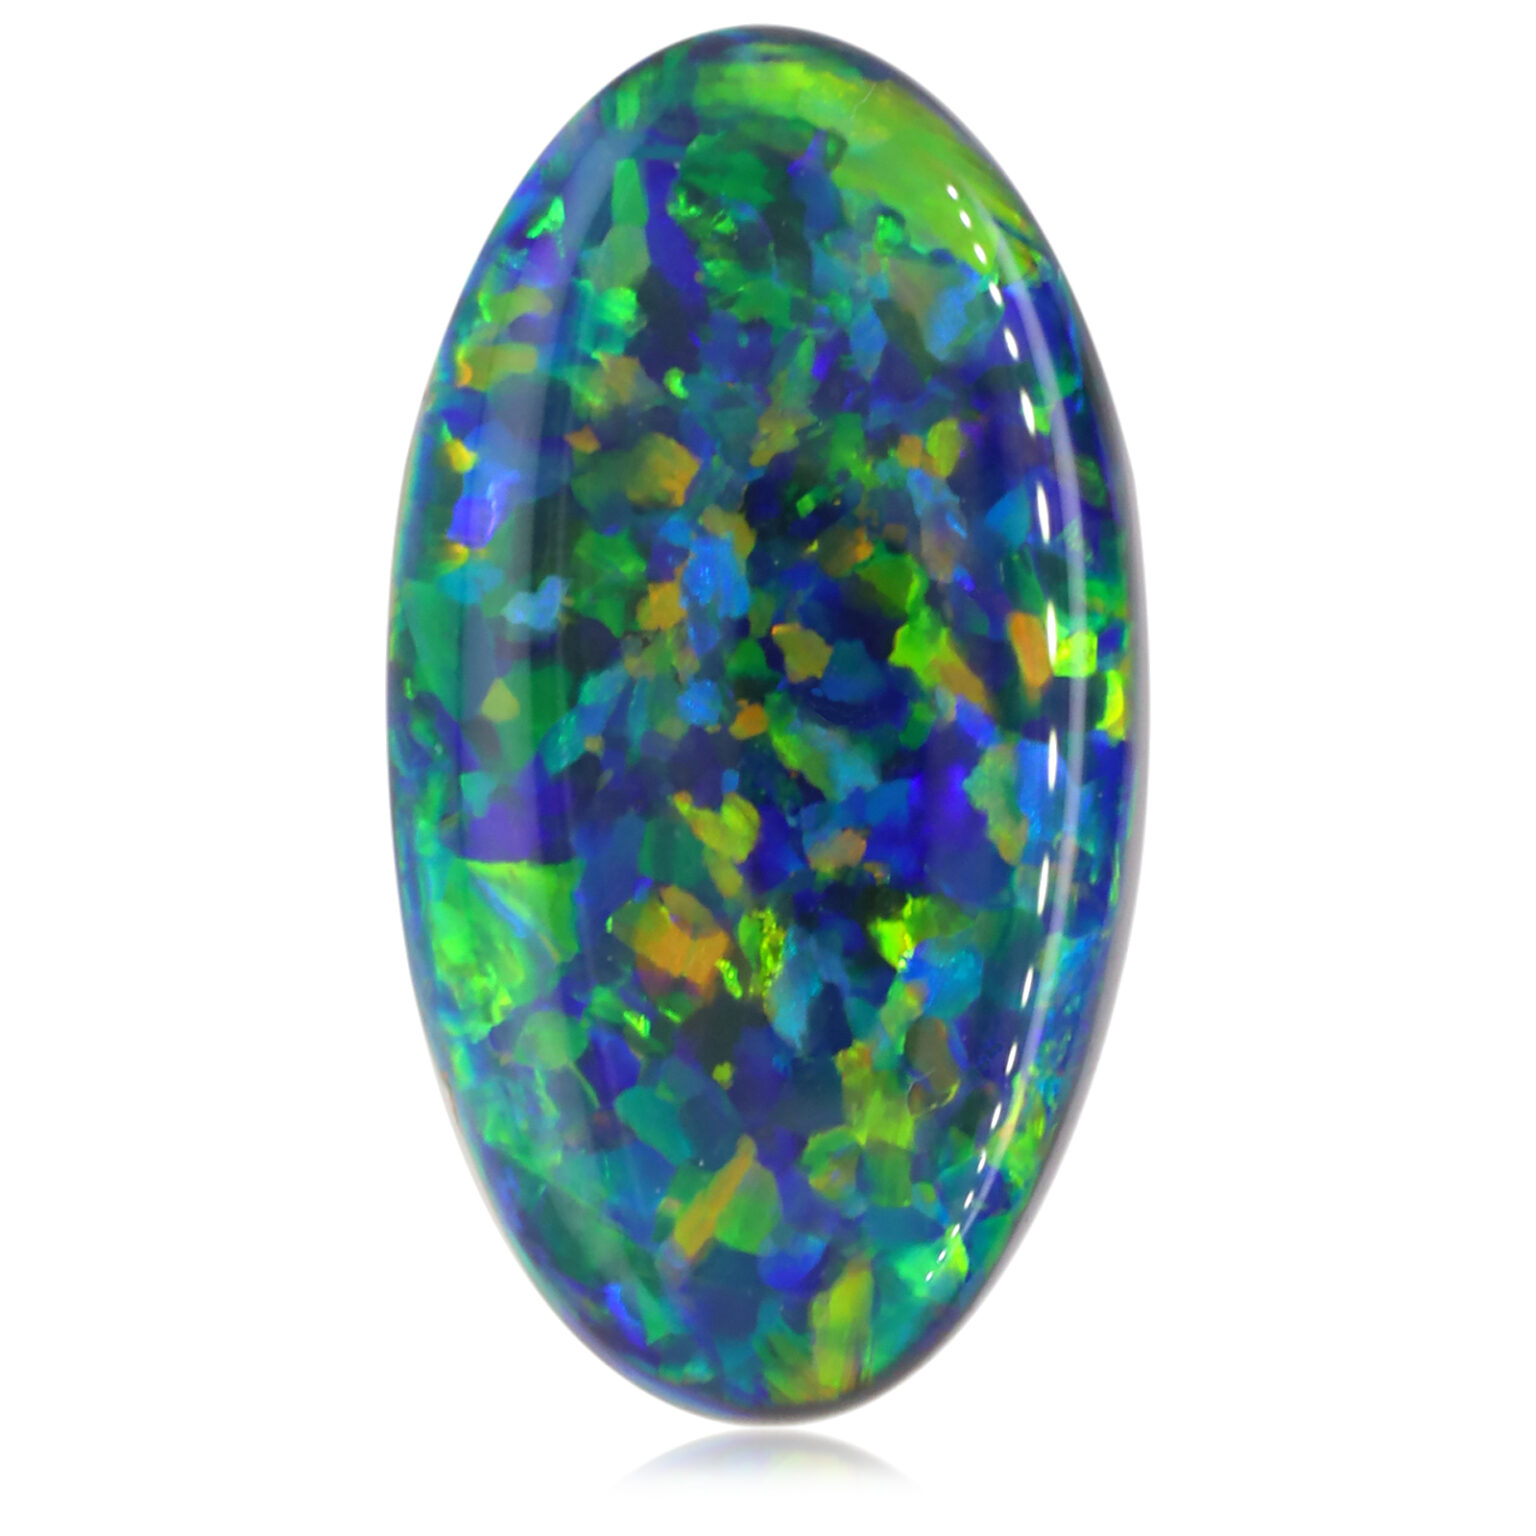 Unset Solid Black Opal | Opals Down Under